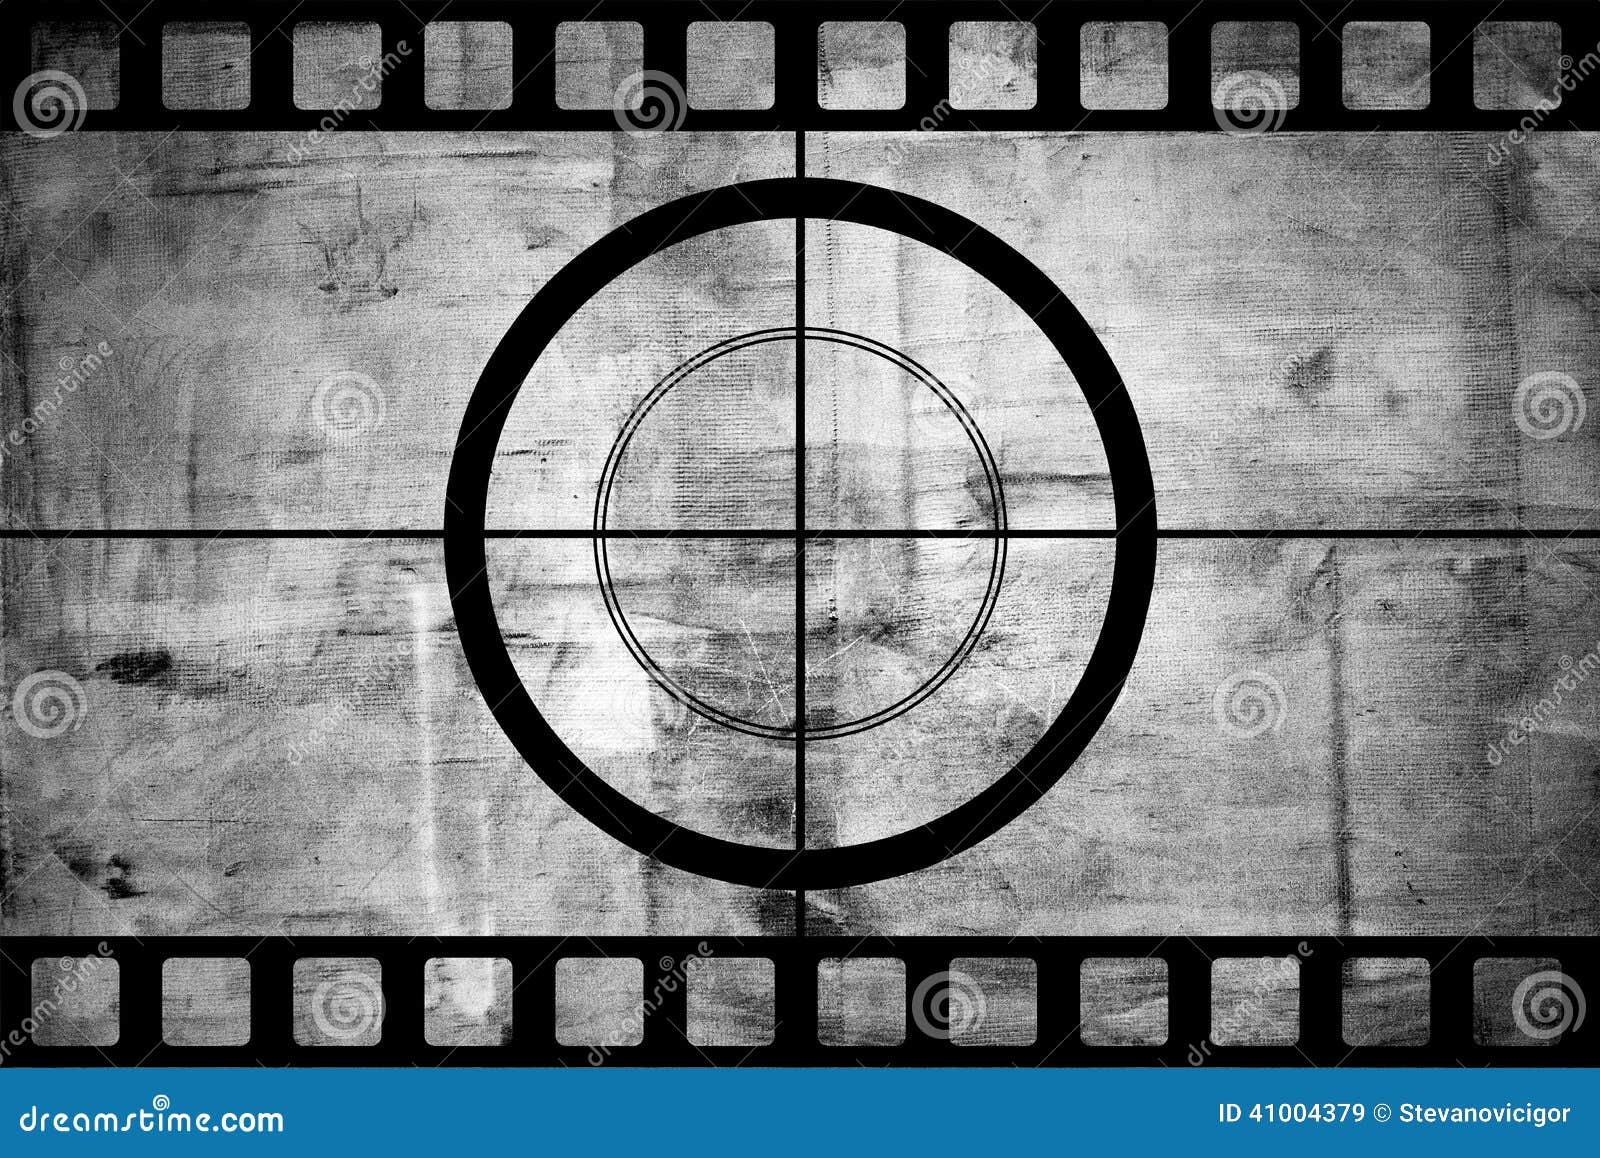 Vintage Movie Film Strip With Countdown Border Stock Image  Image of record, design: 41004379